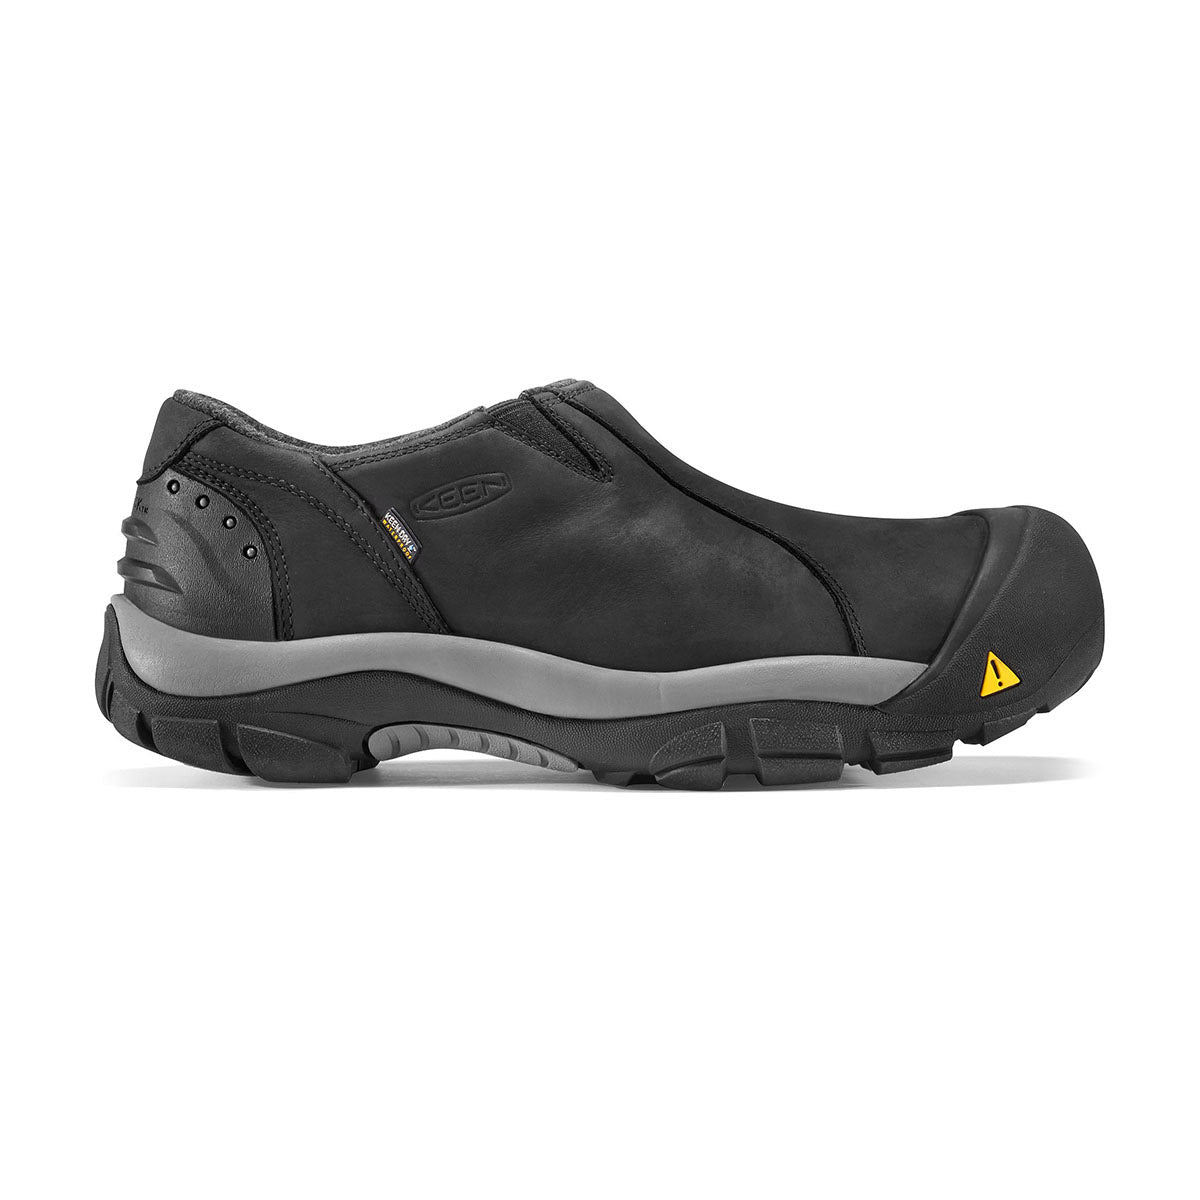 Keen Brixen Low WP Black - Mens slip-on outdoor shoe with a protective toe cap and KEEN.Dry waterproof rubber sole.